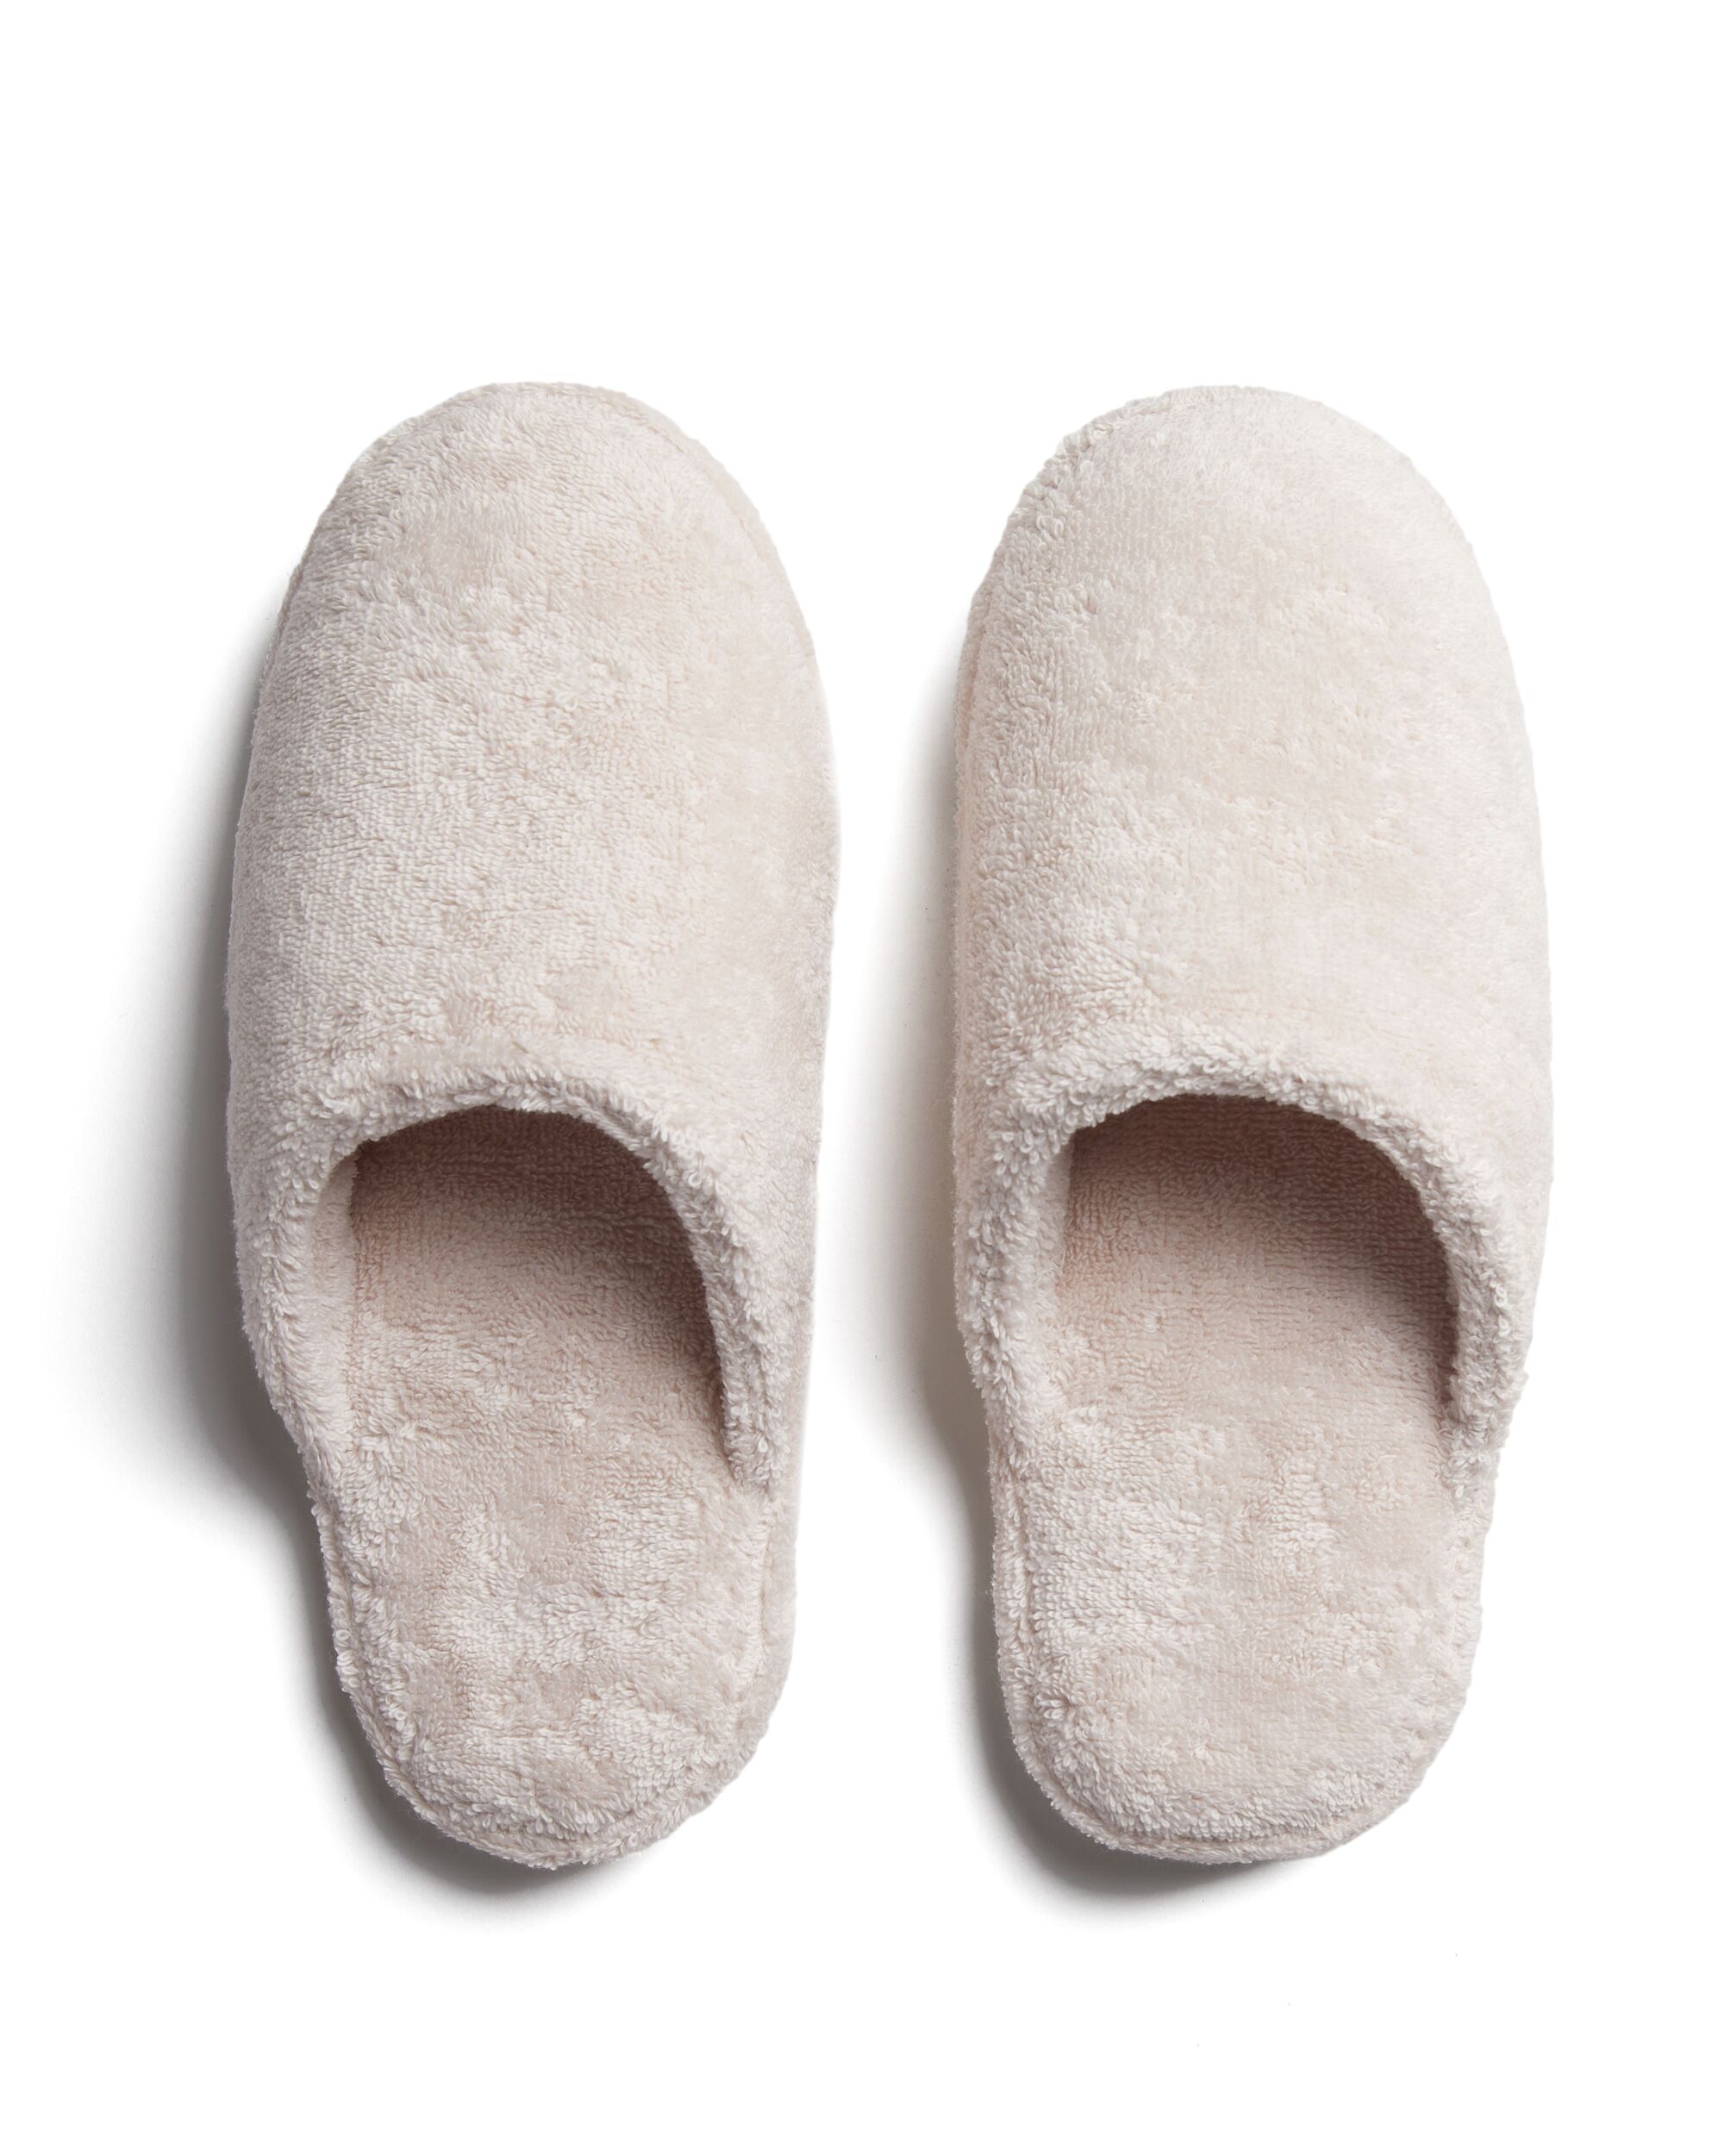 The Classic Turkish Cotton Slippers by Parachute 